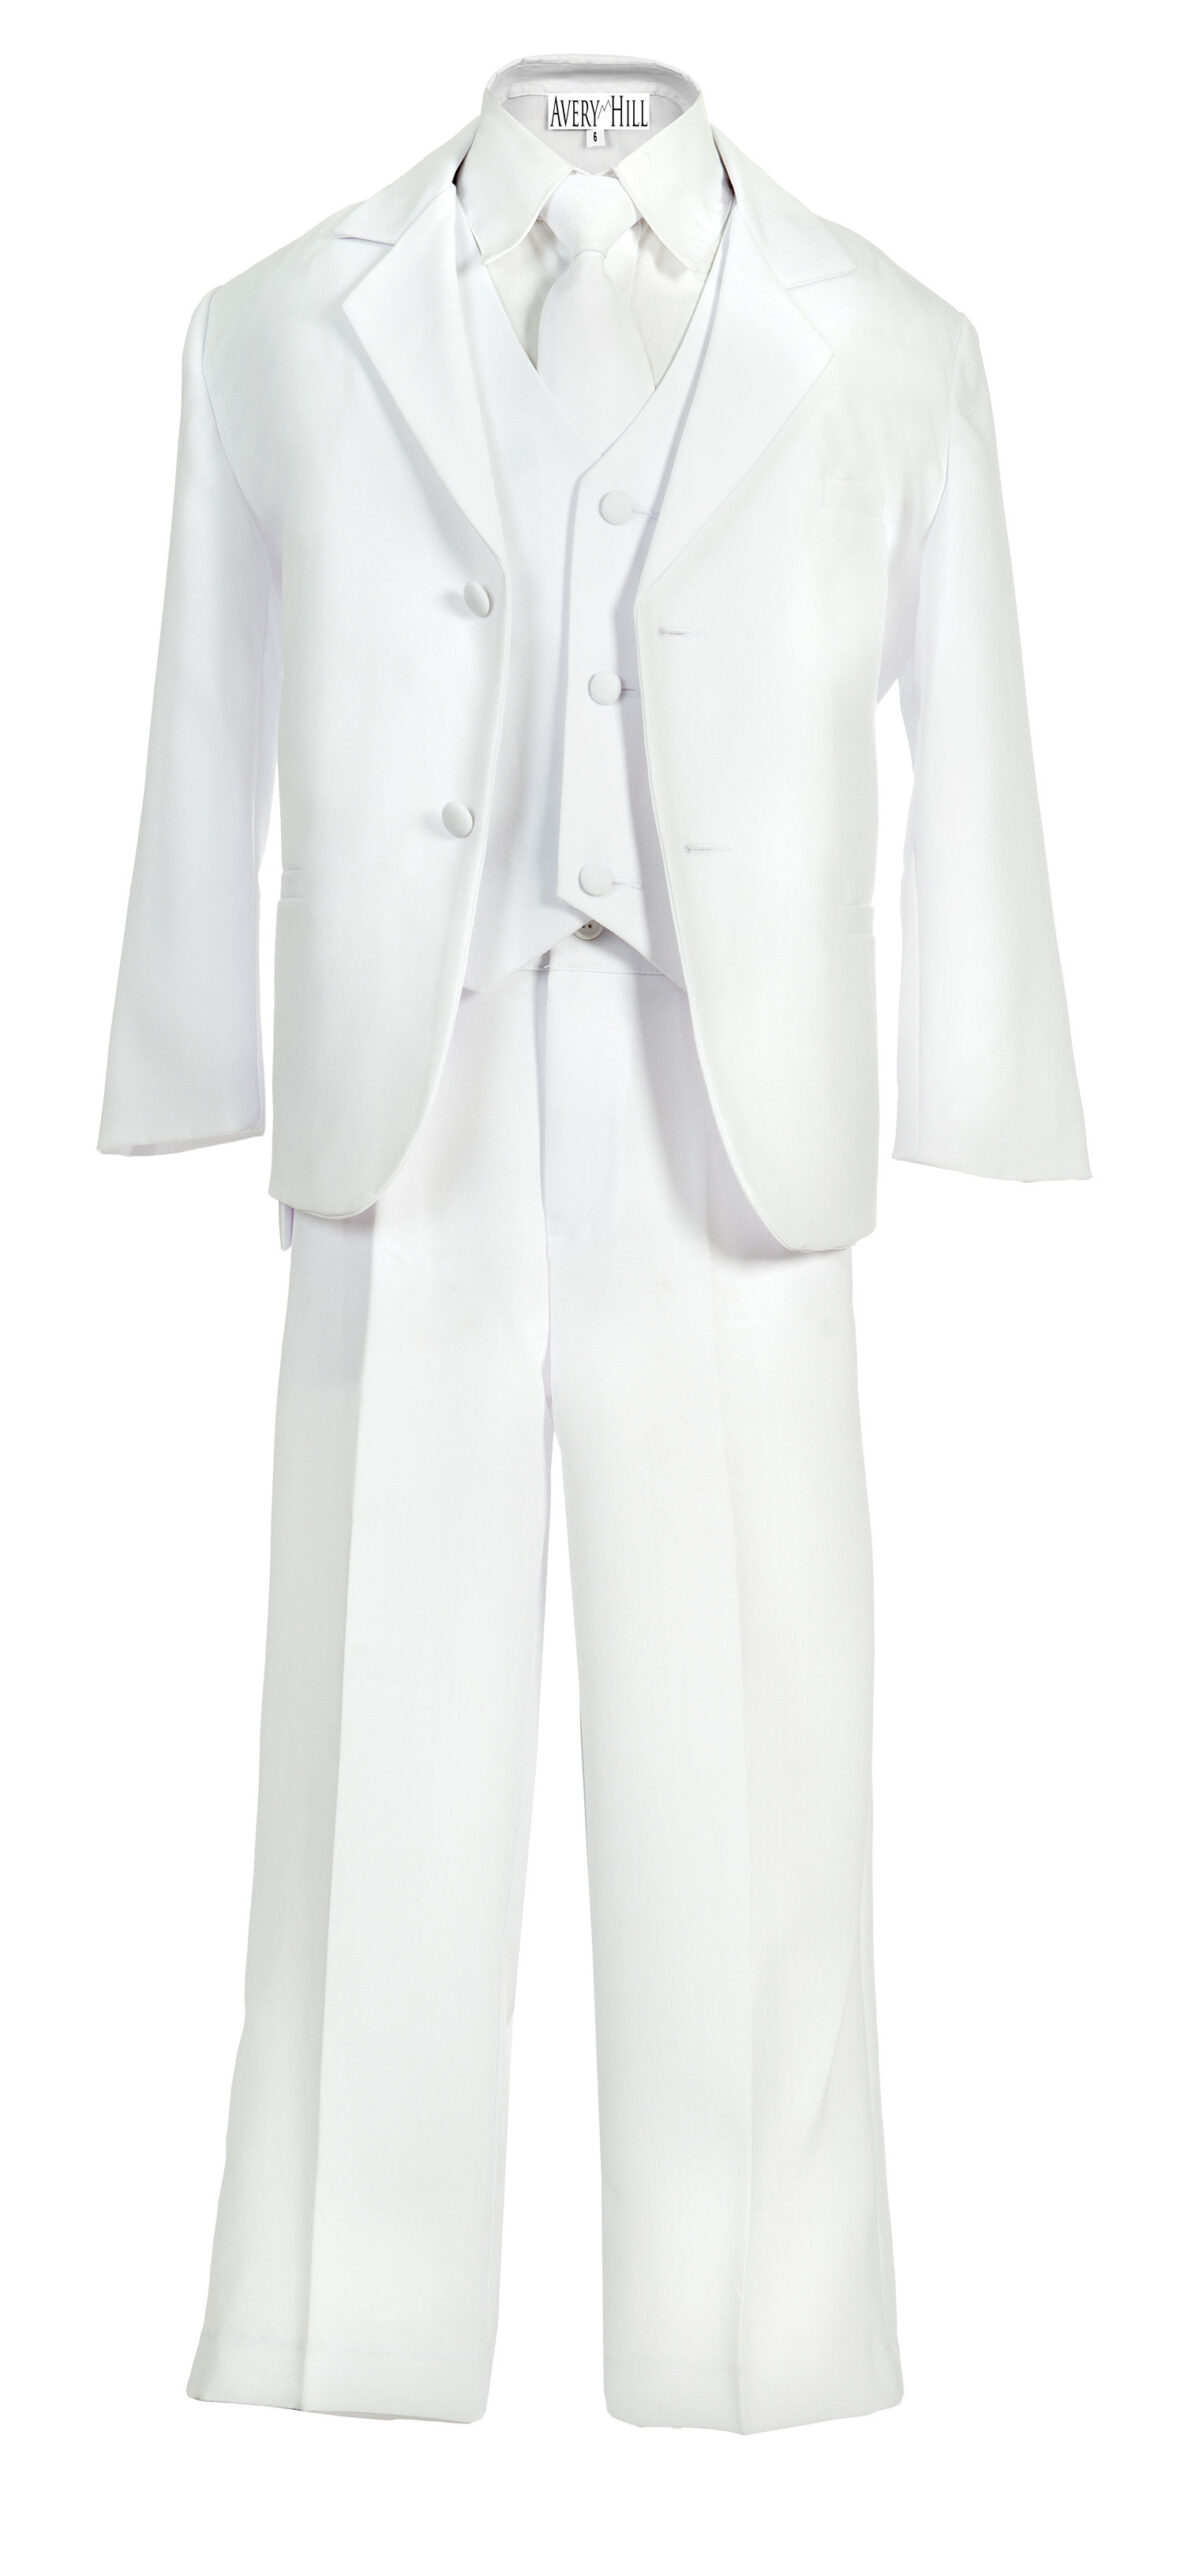 Avery Hill Boys Formal 5 Piece Suit with Shirt and Vest White - 7